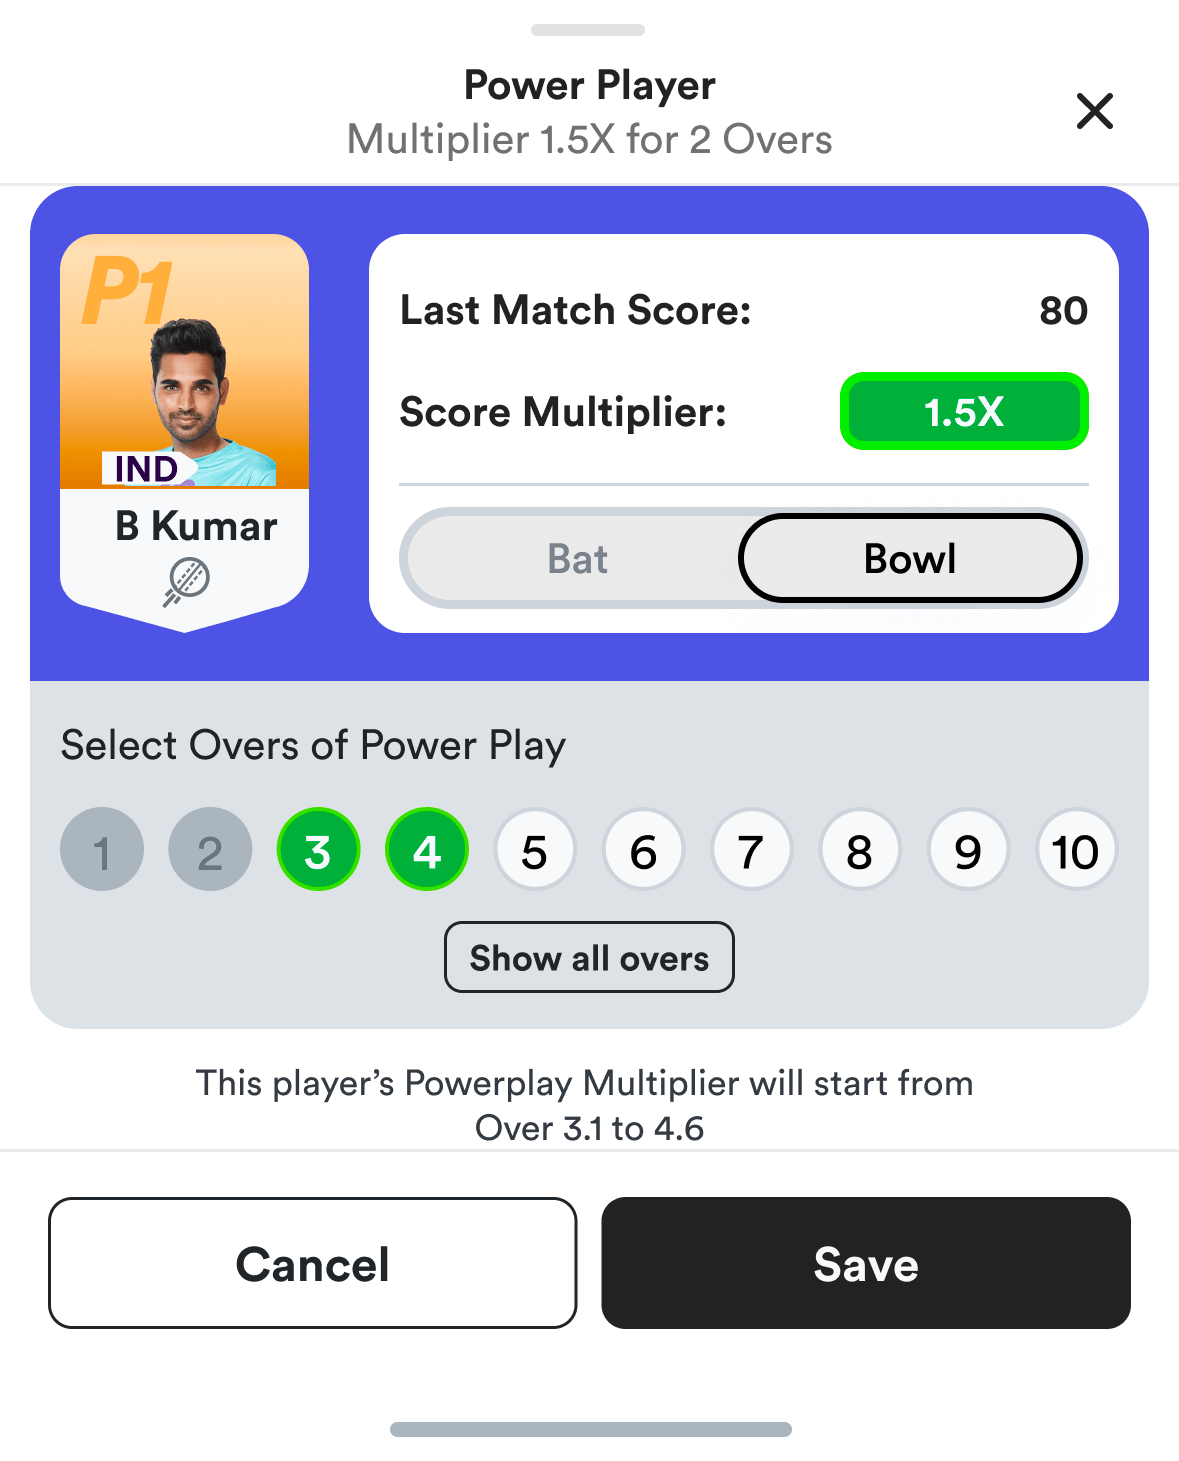 Select Overs for PowerPlayers